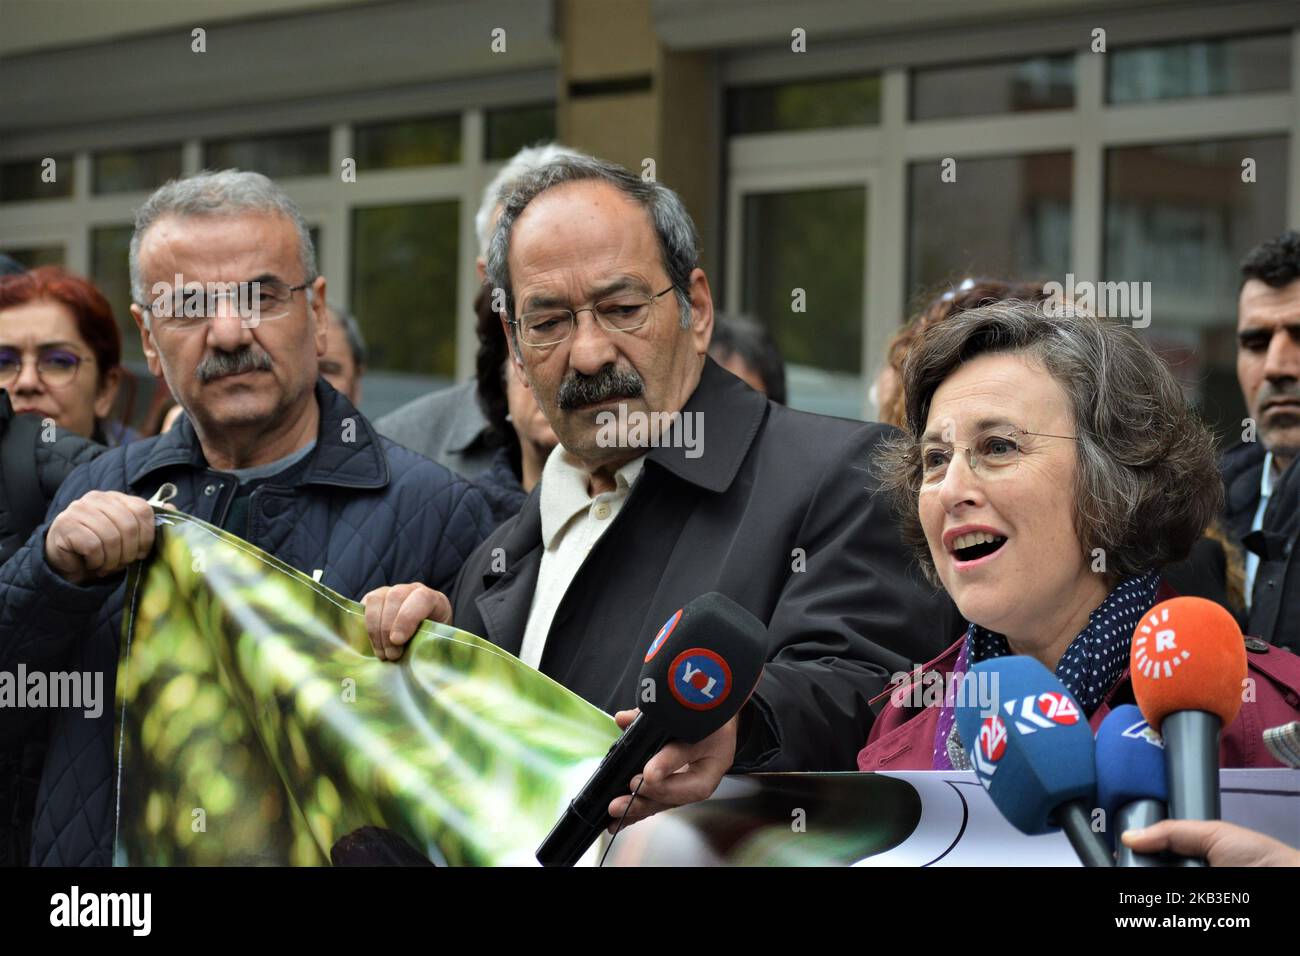 Deputy of the pro-Kurdish Peoples' Democratic Party (HDP), Filiz Kerestecioglu (R) speaks during a protest calling for the release of her party's former co-leader Selahattin Demirtas in Ankara, Turkey on November 23, 2018. The European Court of Human Rights (ECHR) urged Turkey on November 20 to release Demirtas who has been held for two years on terror charges as the call was immediately rejected by Turkish President Recep Tayyip Erdogan. President Erdogan added on November 21 that the ECHR's ruling on Demirtas amounted to support of terrorism. On the other hand, Turkey and the European Union  Stock Photo